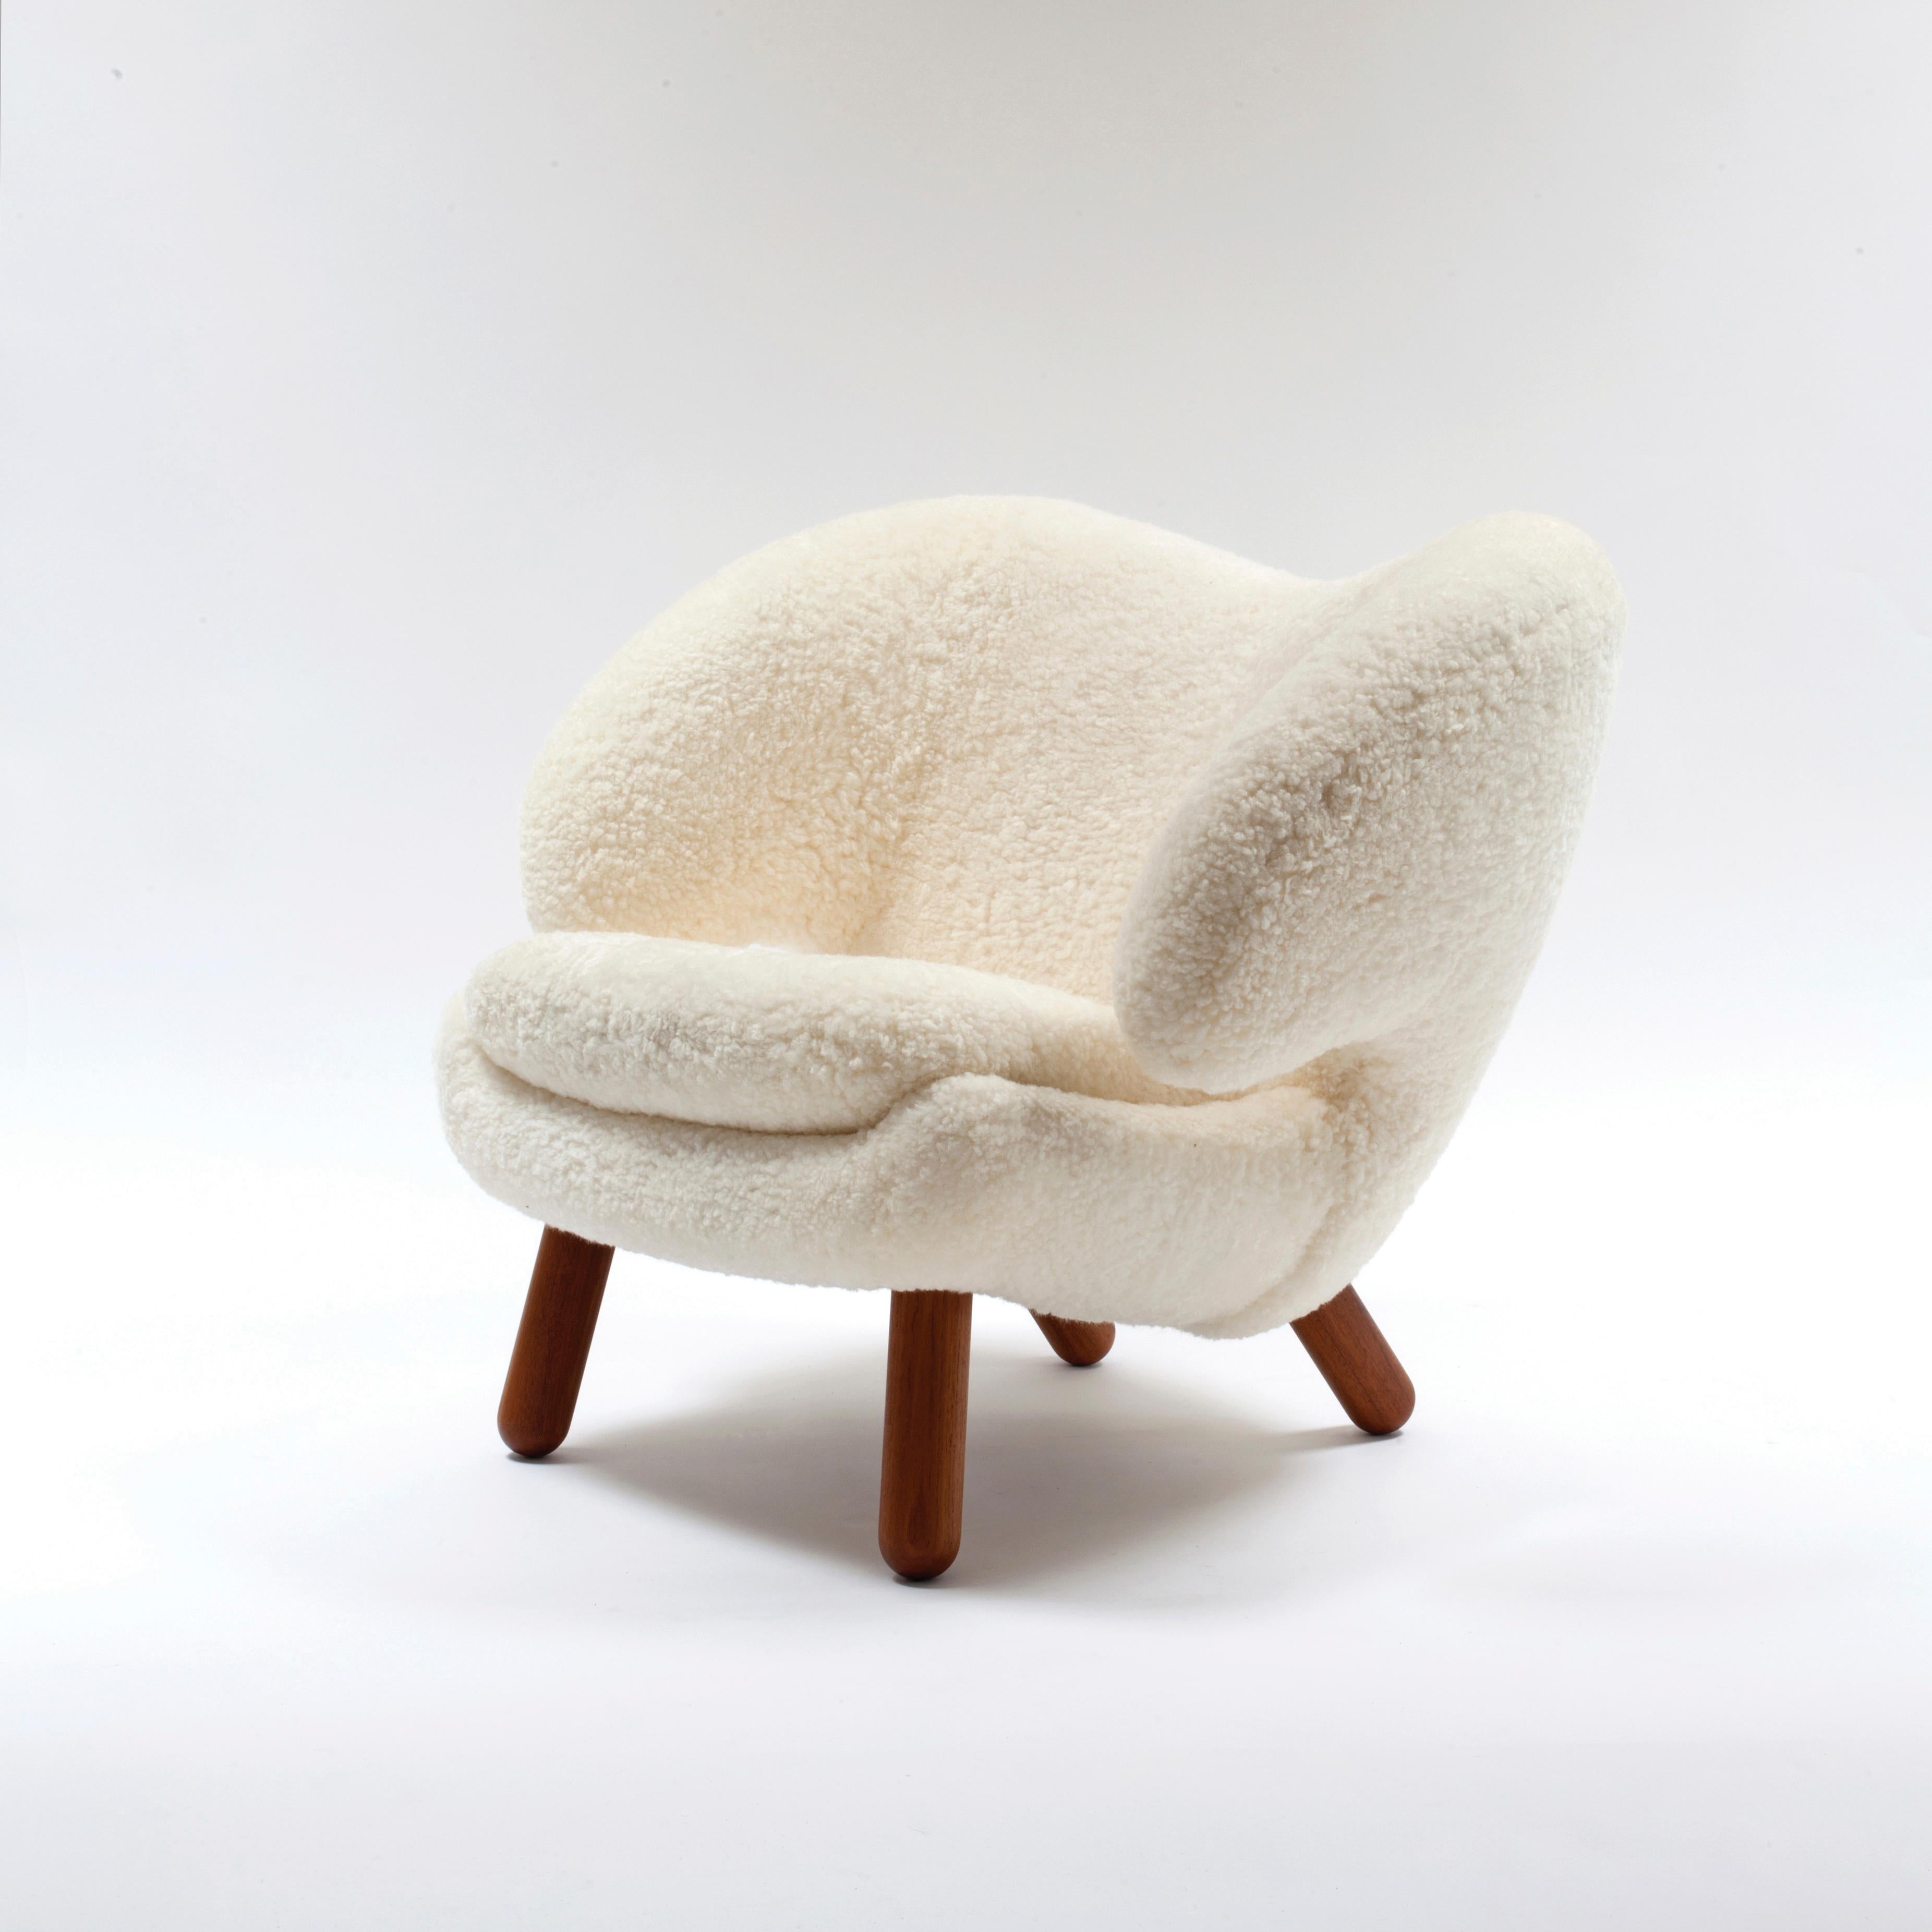 Finn Juhl Pelican Chair Skandilock Sheep Offwhite and Wood In Good Condition For Sale In Barcelona, Barcelona